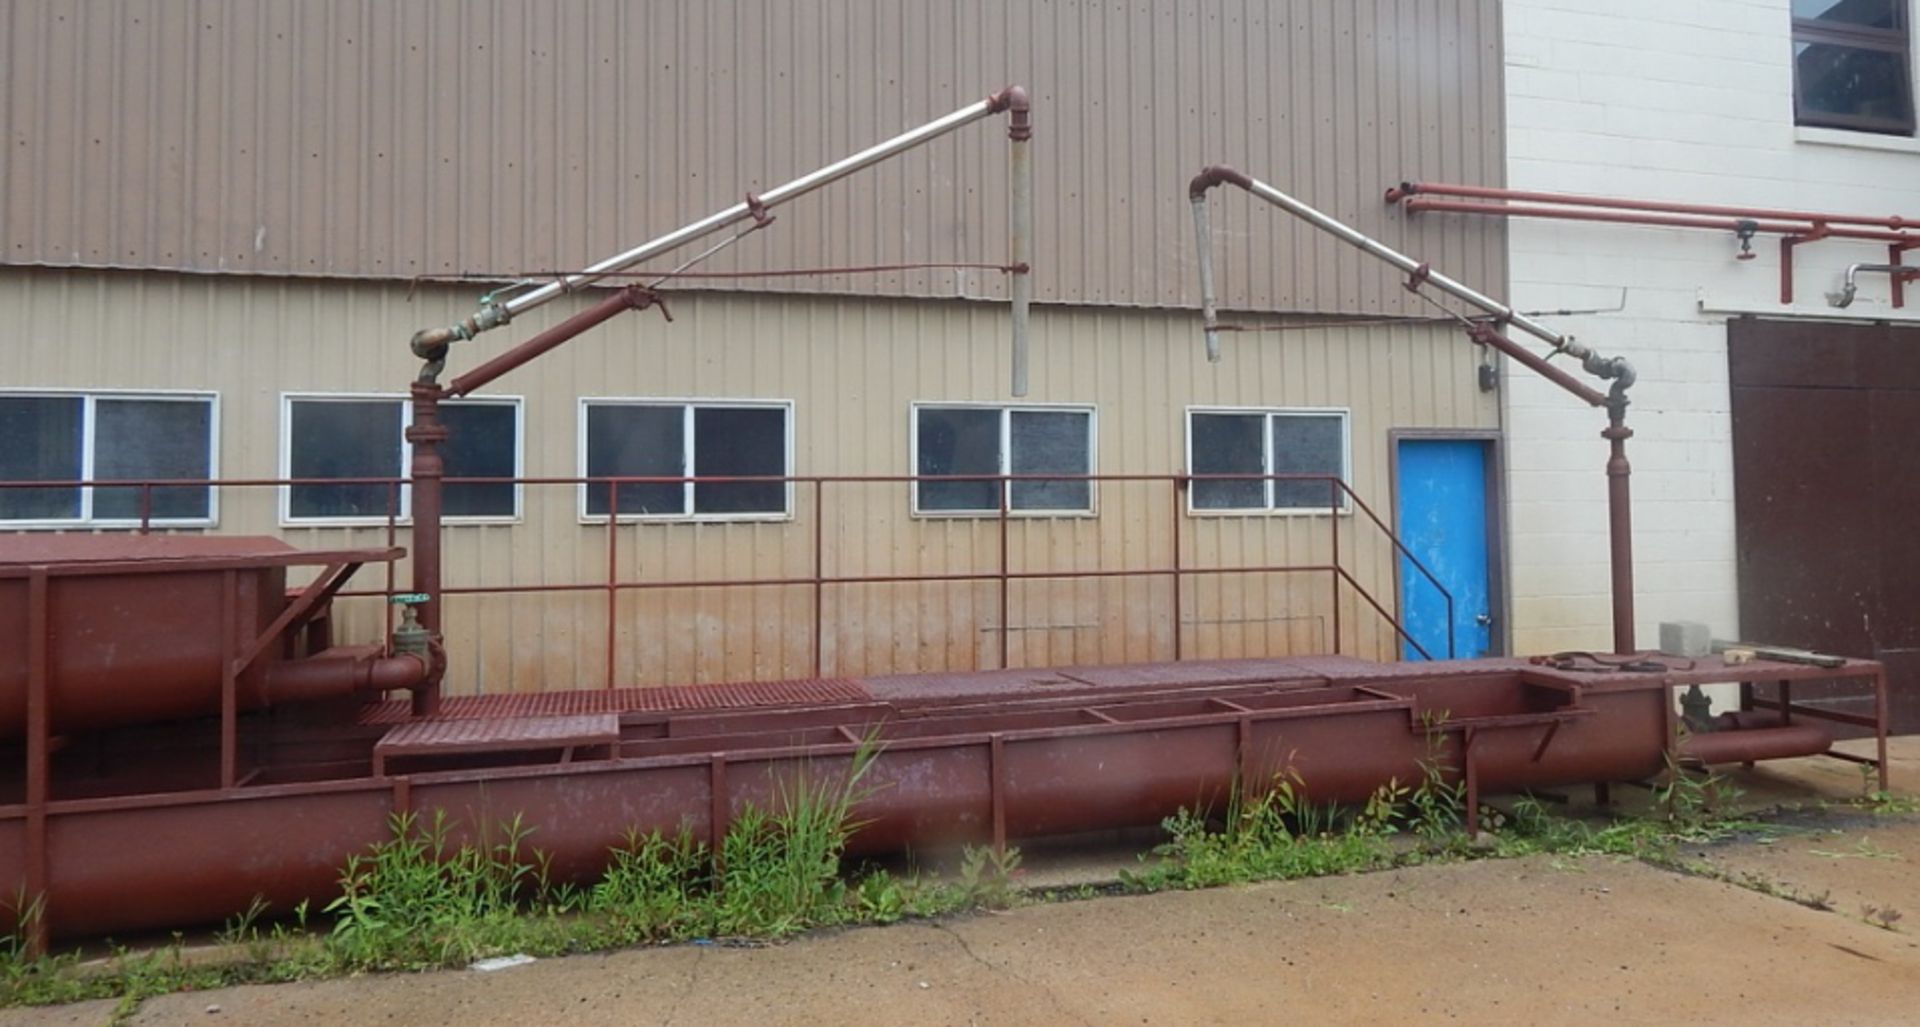 APPROX 40' TOMATO WASH BASIN WITH INCLINE INFEED CONVEYOR AND (2) WASH SPRAYERS (CI) - Image 2 of 2